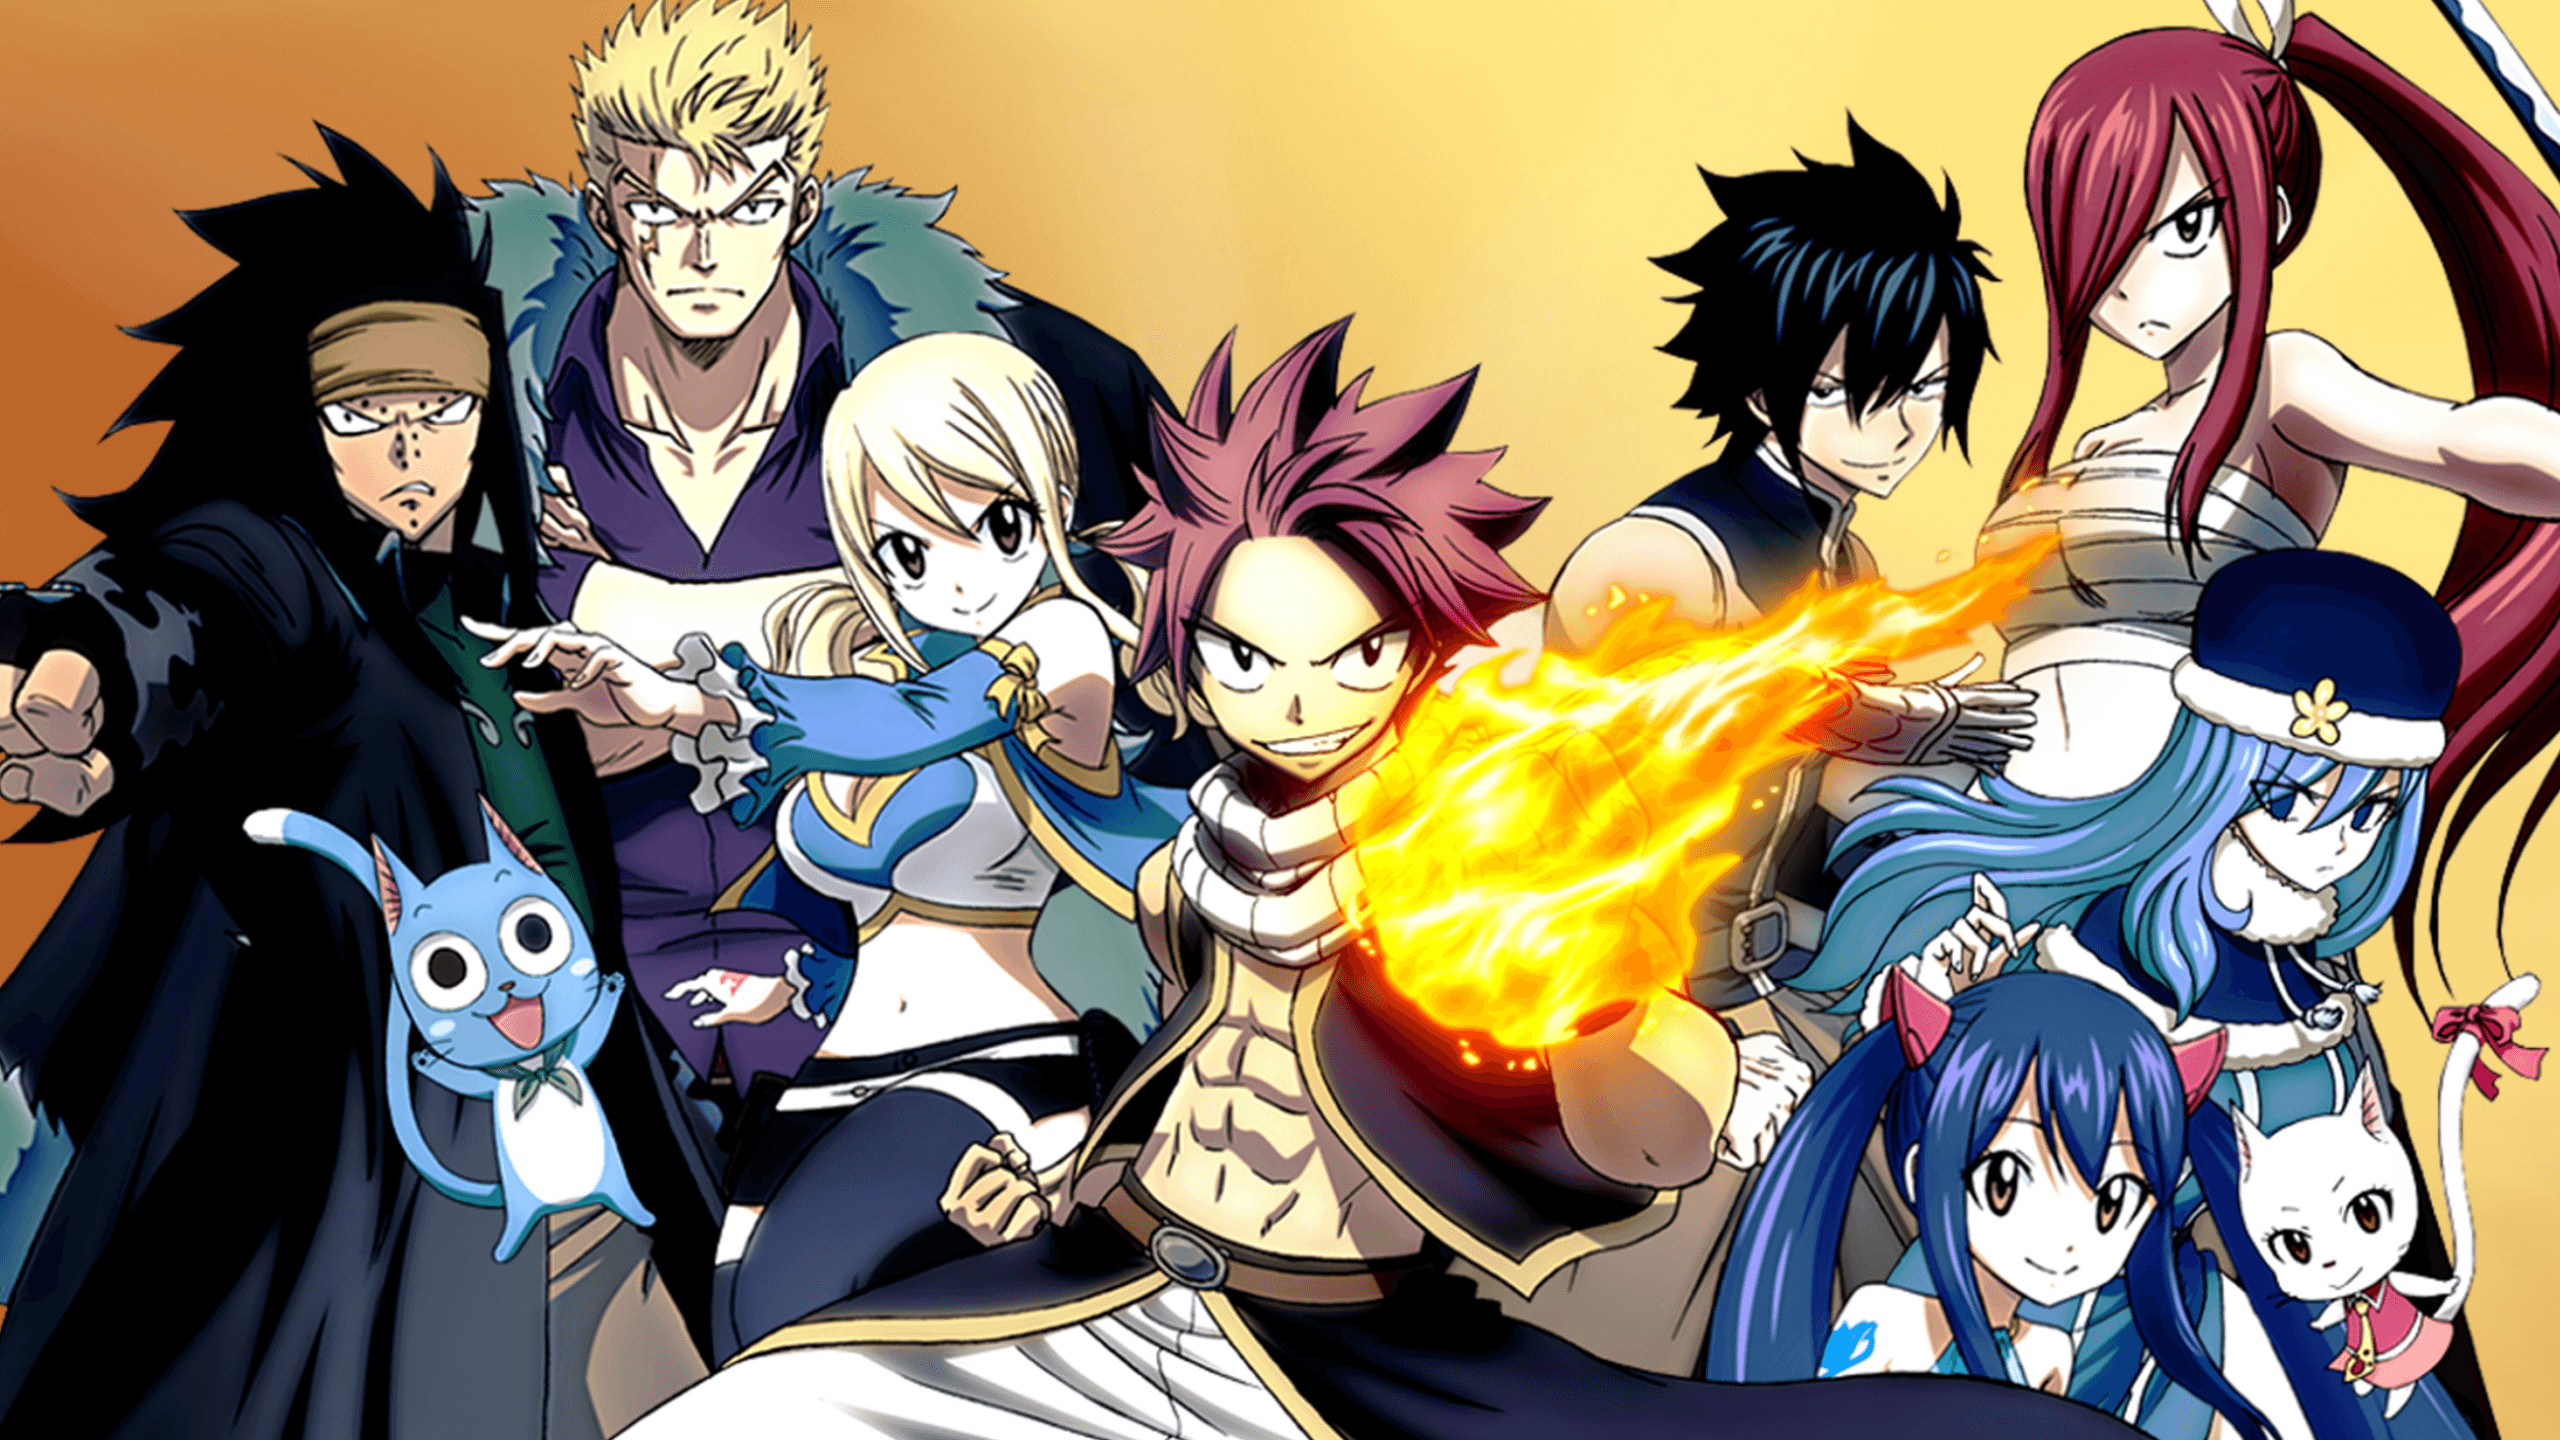 2560x1440 1280x800 Natsu Dragneel(Fairy Tail) images natsu HD wallpaper and  background ...">